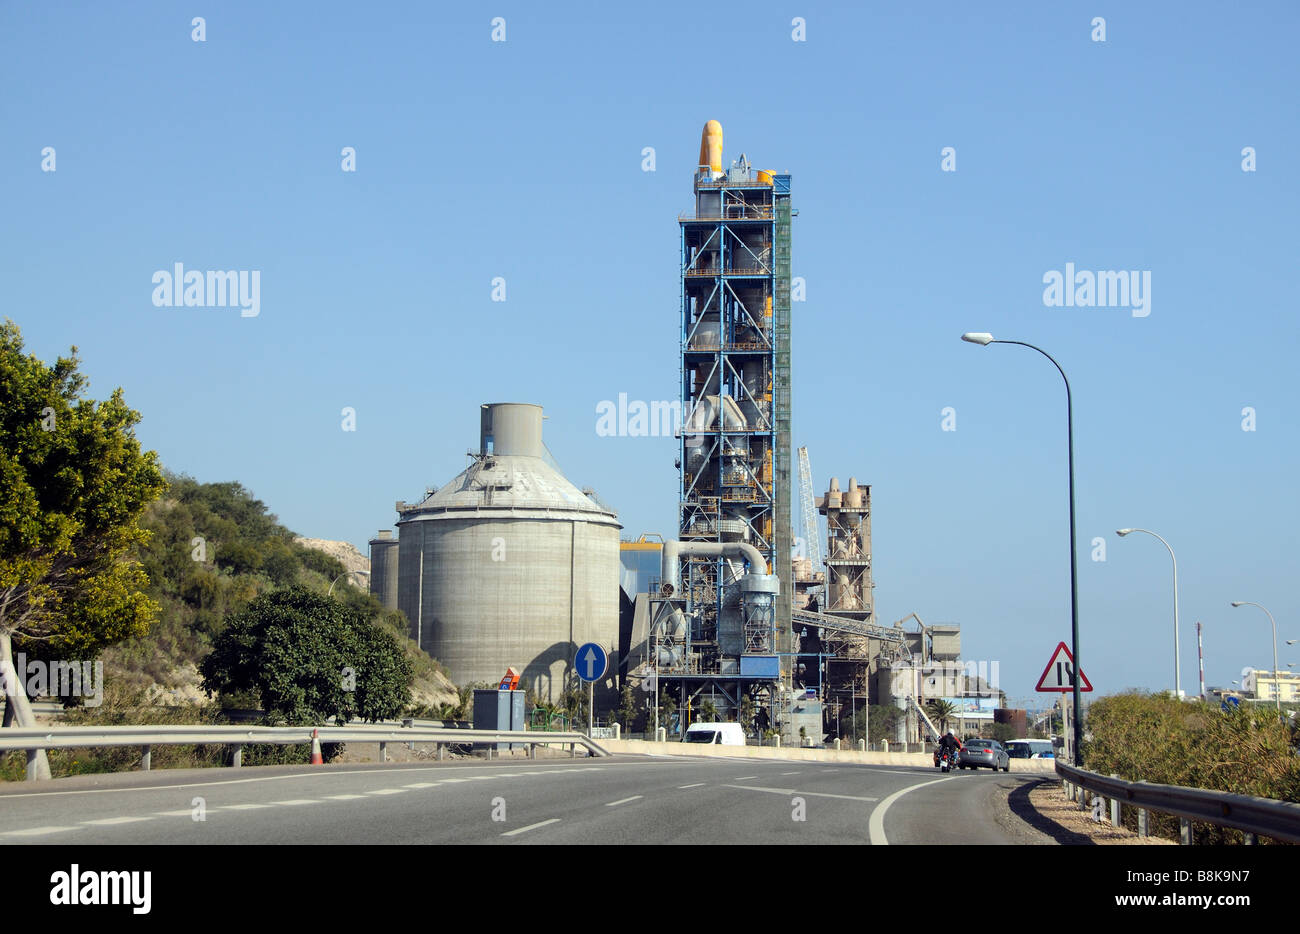 The FYM Italcementi Group cement producing industrial site situated on the roadside in eastern Malaga southern Spain Stock Photo